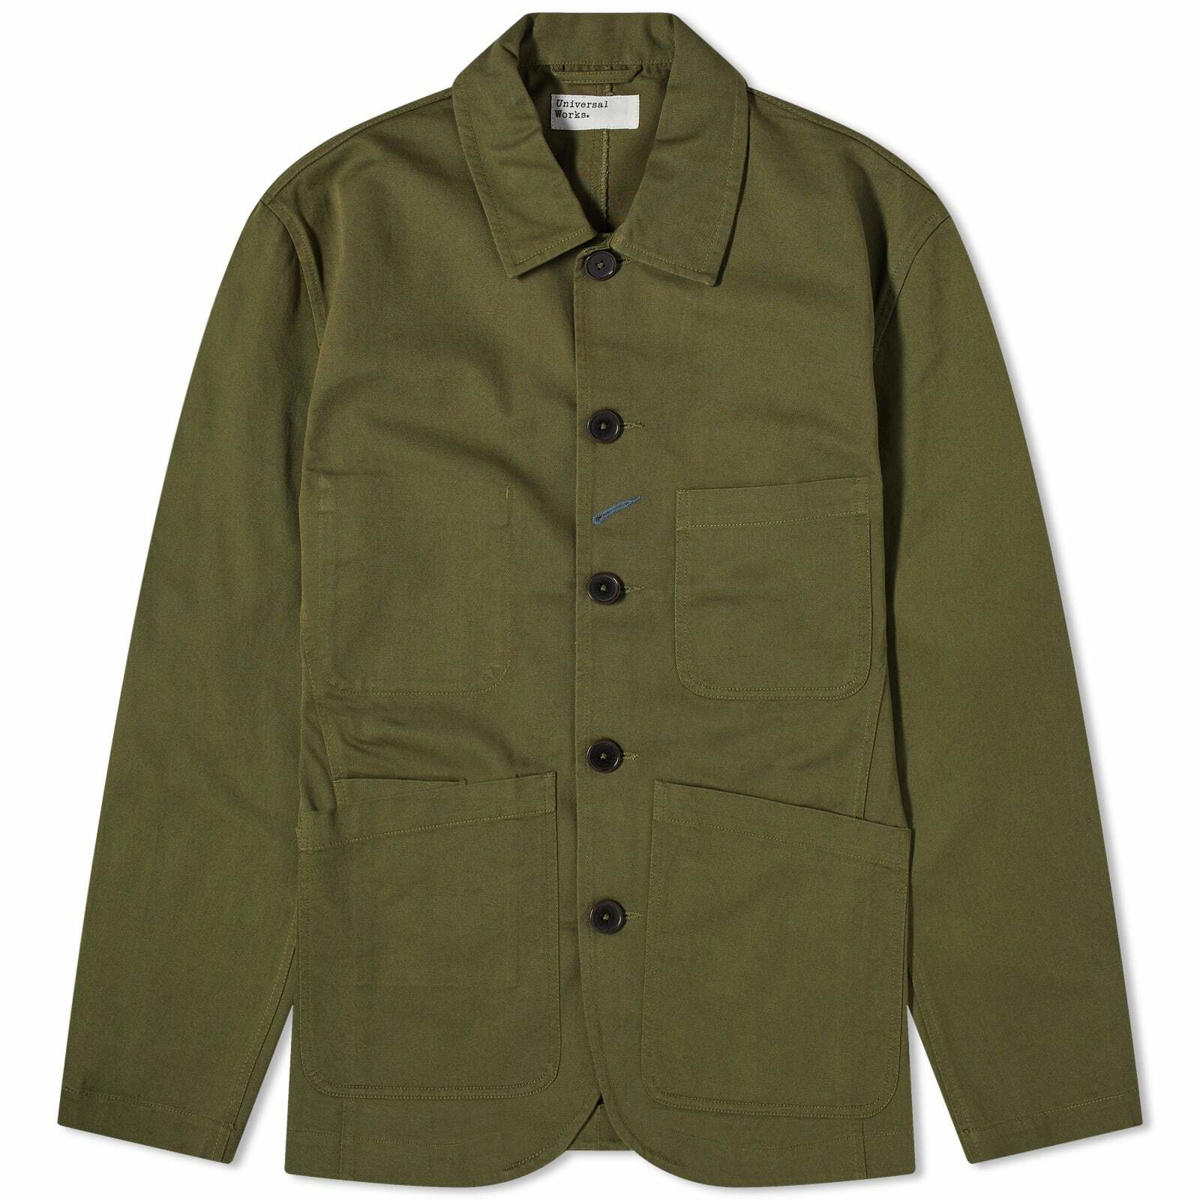 Universal Works Men's Twill Bakers Jacket in Light Olive Universal Works